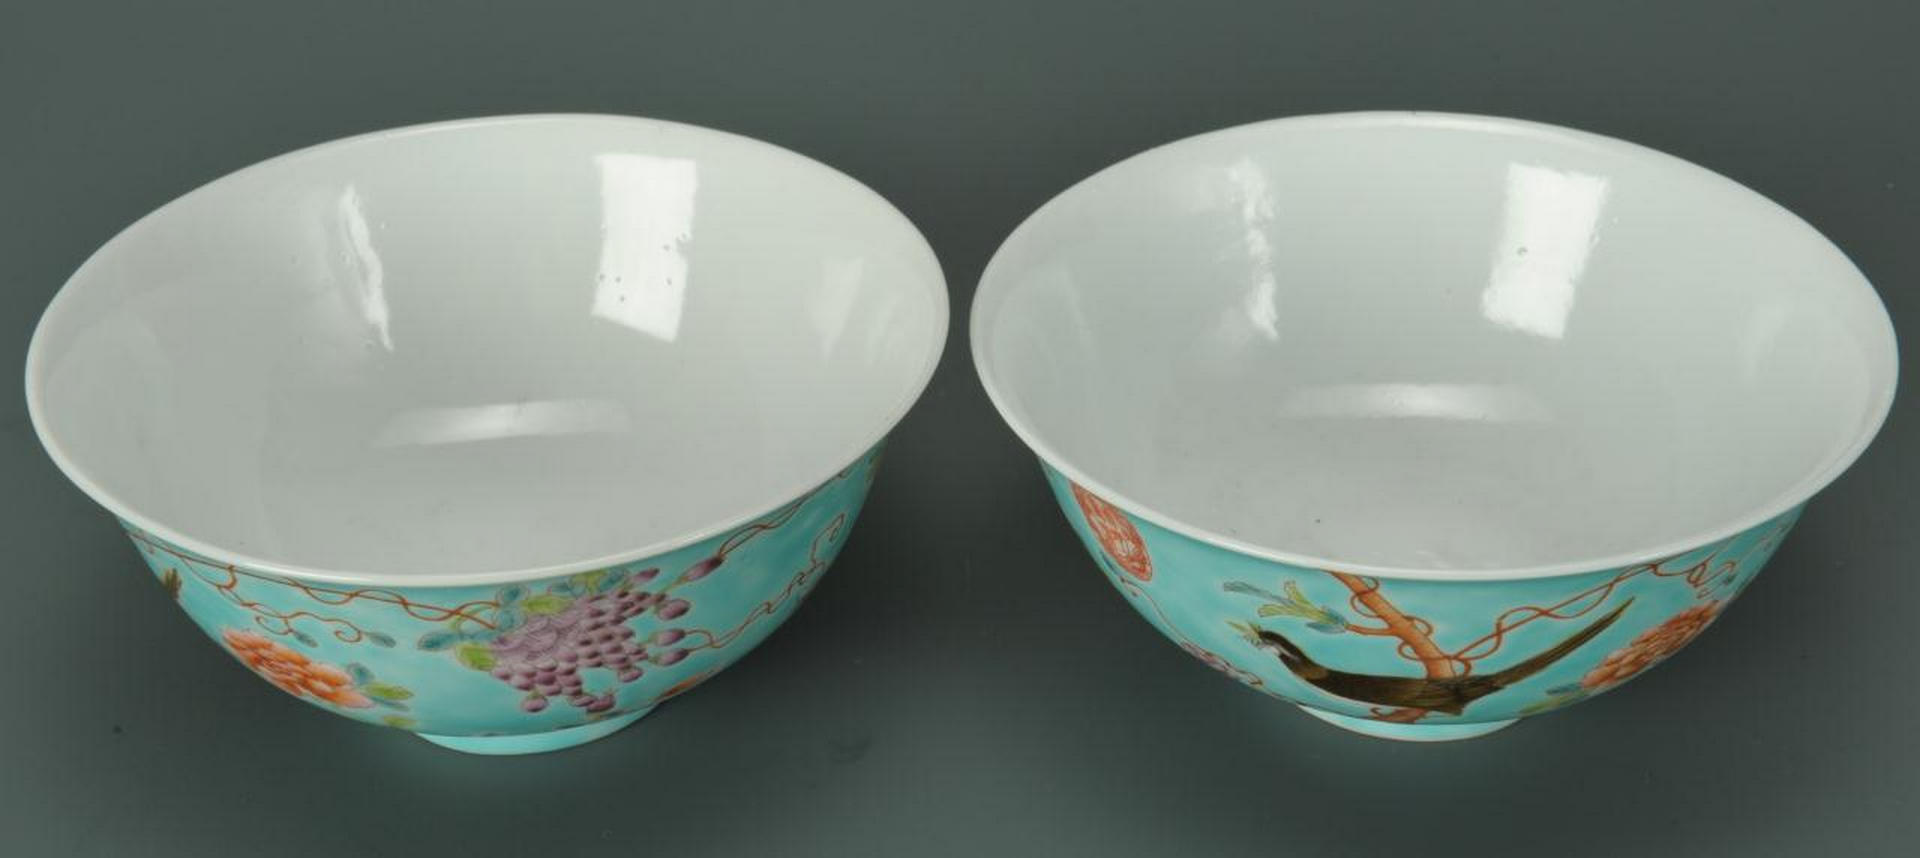 Lot 474: Pair Chinese Famille Rose Bowls, Bird decoration